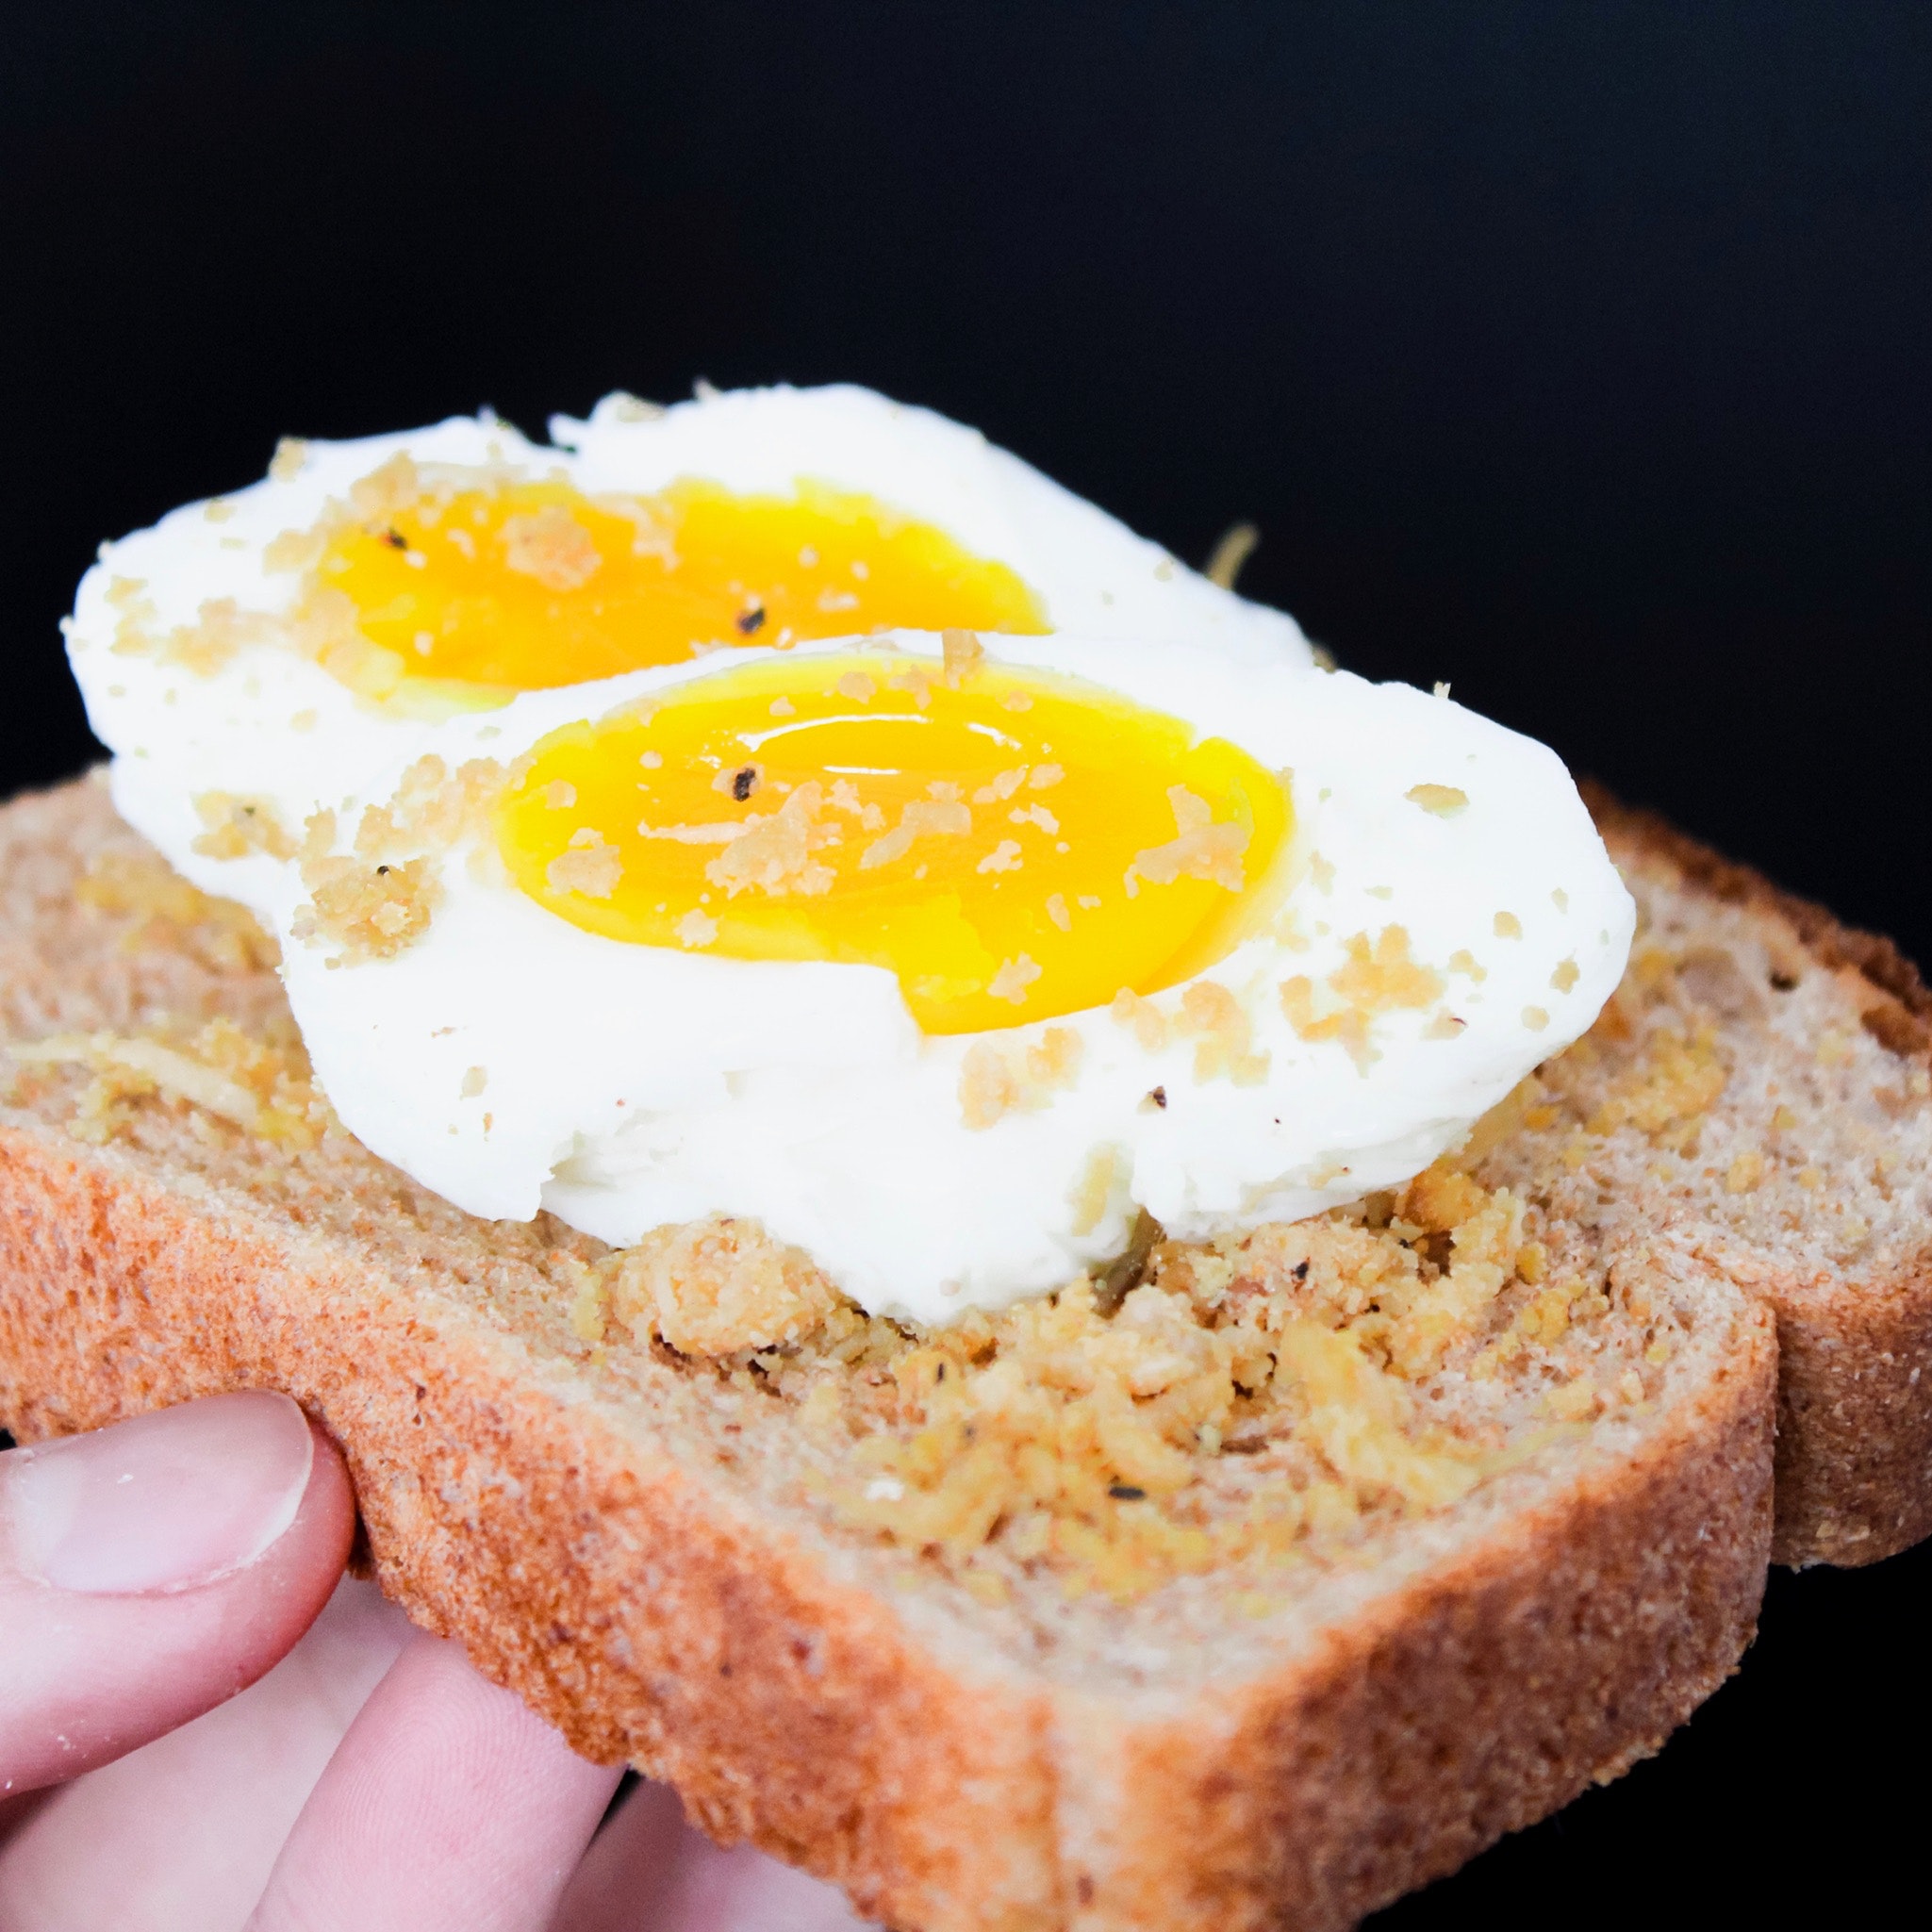 Sliced bread with eggs photo